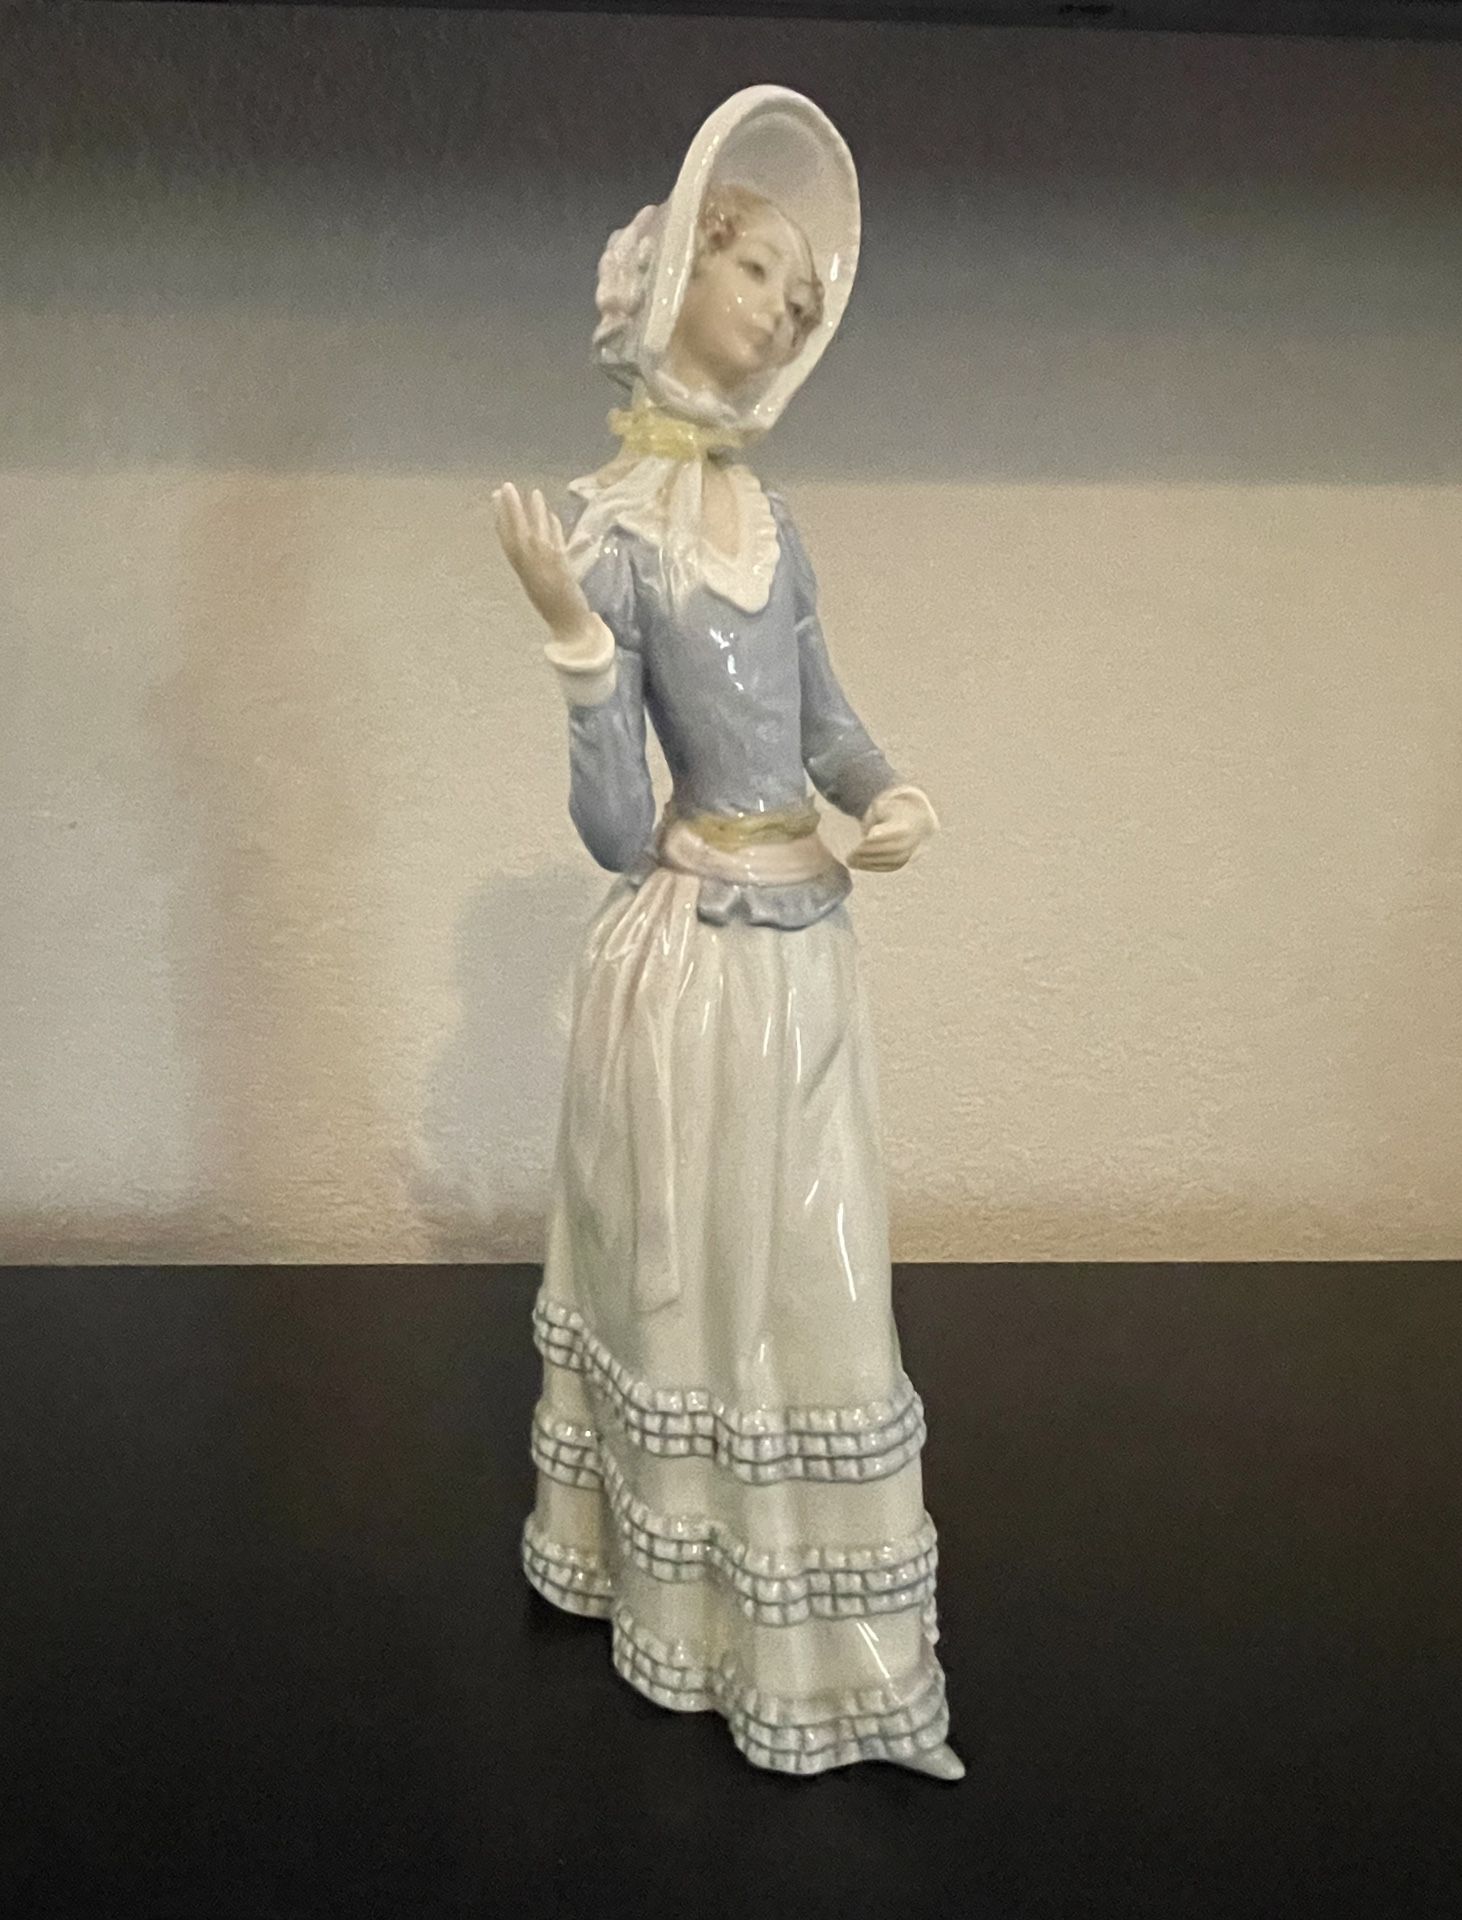 Authentic Lladro Woman with Bonnet and Parasol Umbrella